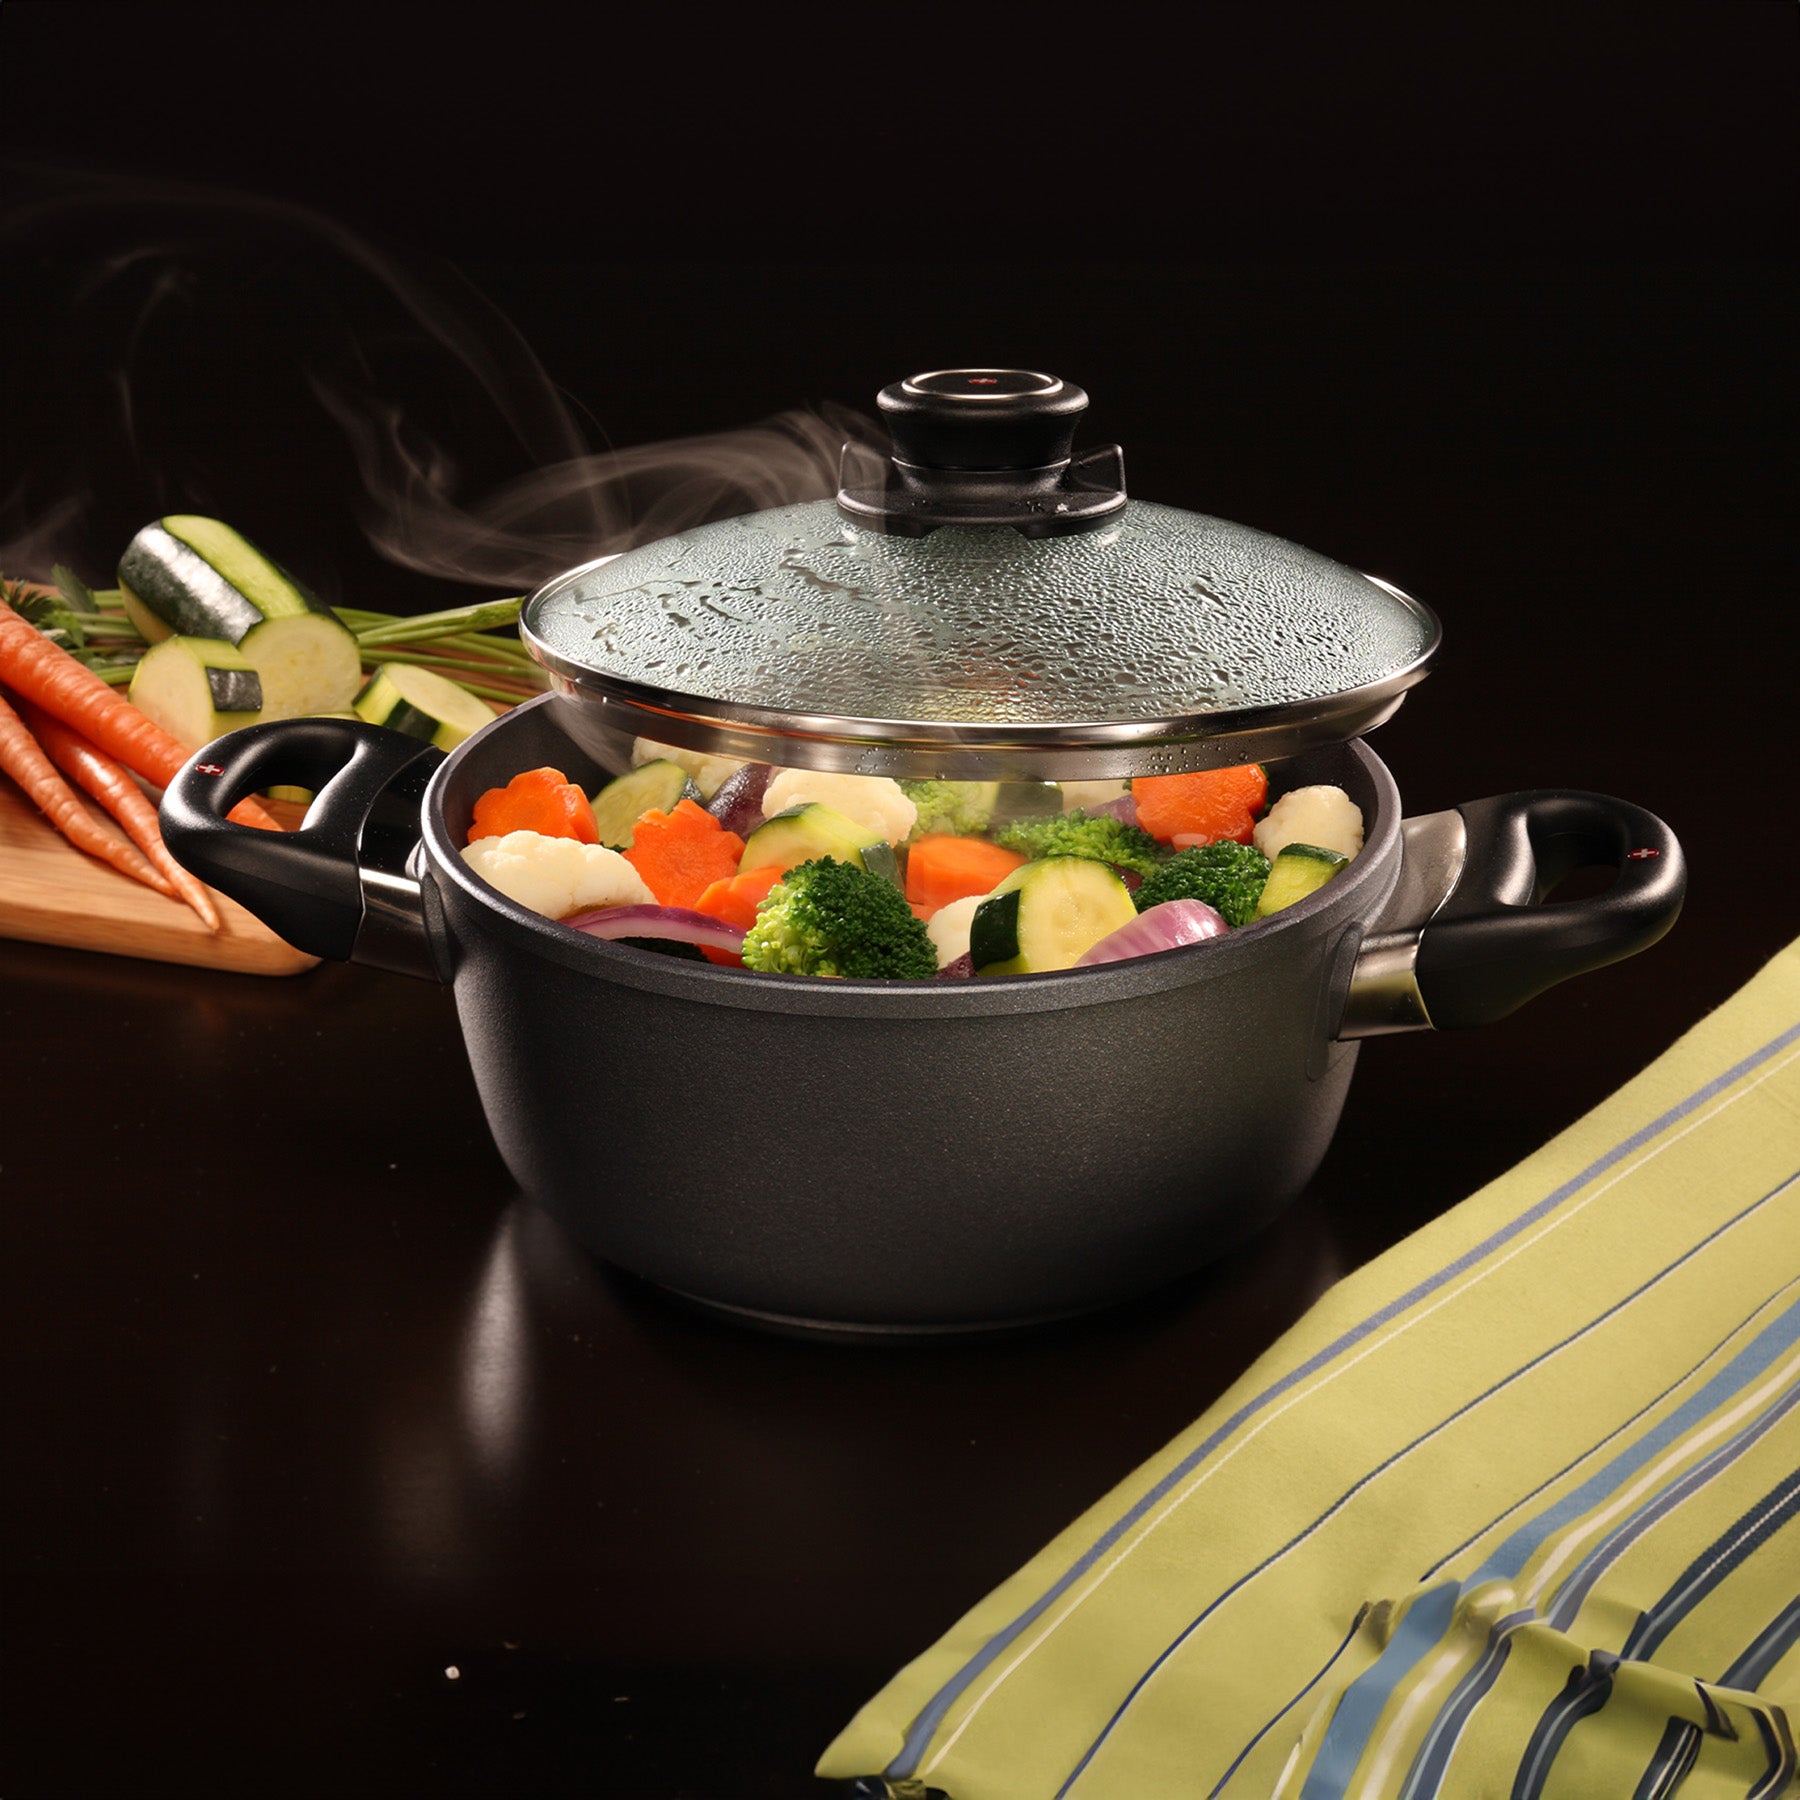 HD Nonstick Casserole with Glass Lid in use on black kitchen counter top